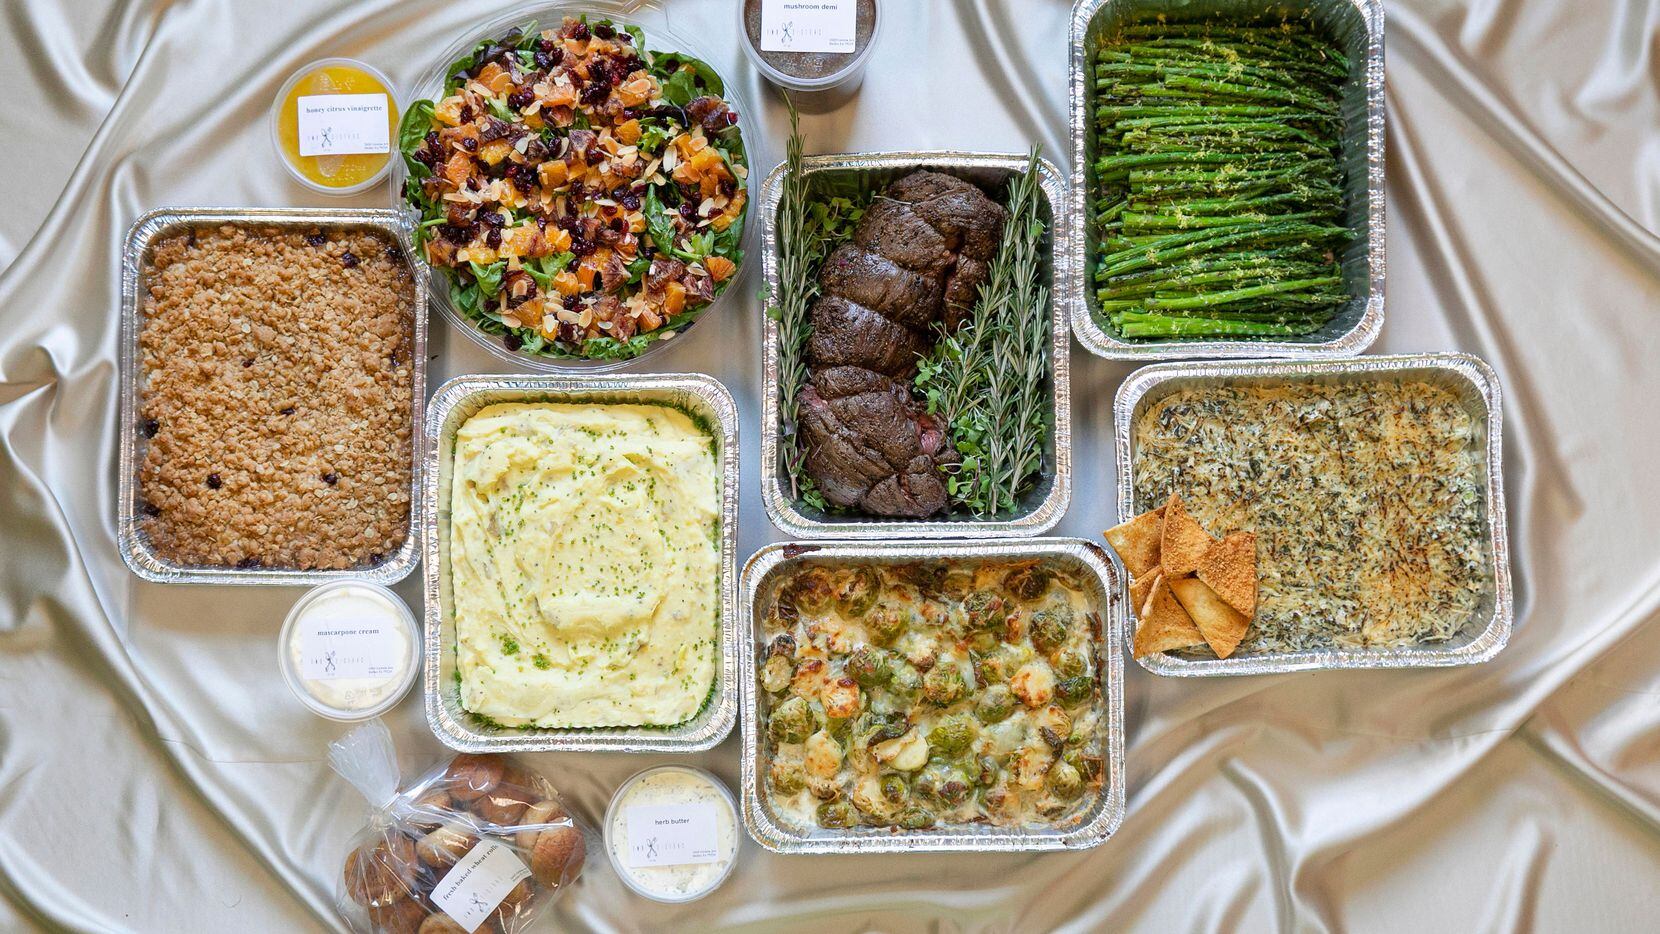 Two Sisters Catering is offering takeout packages this holiday season.